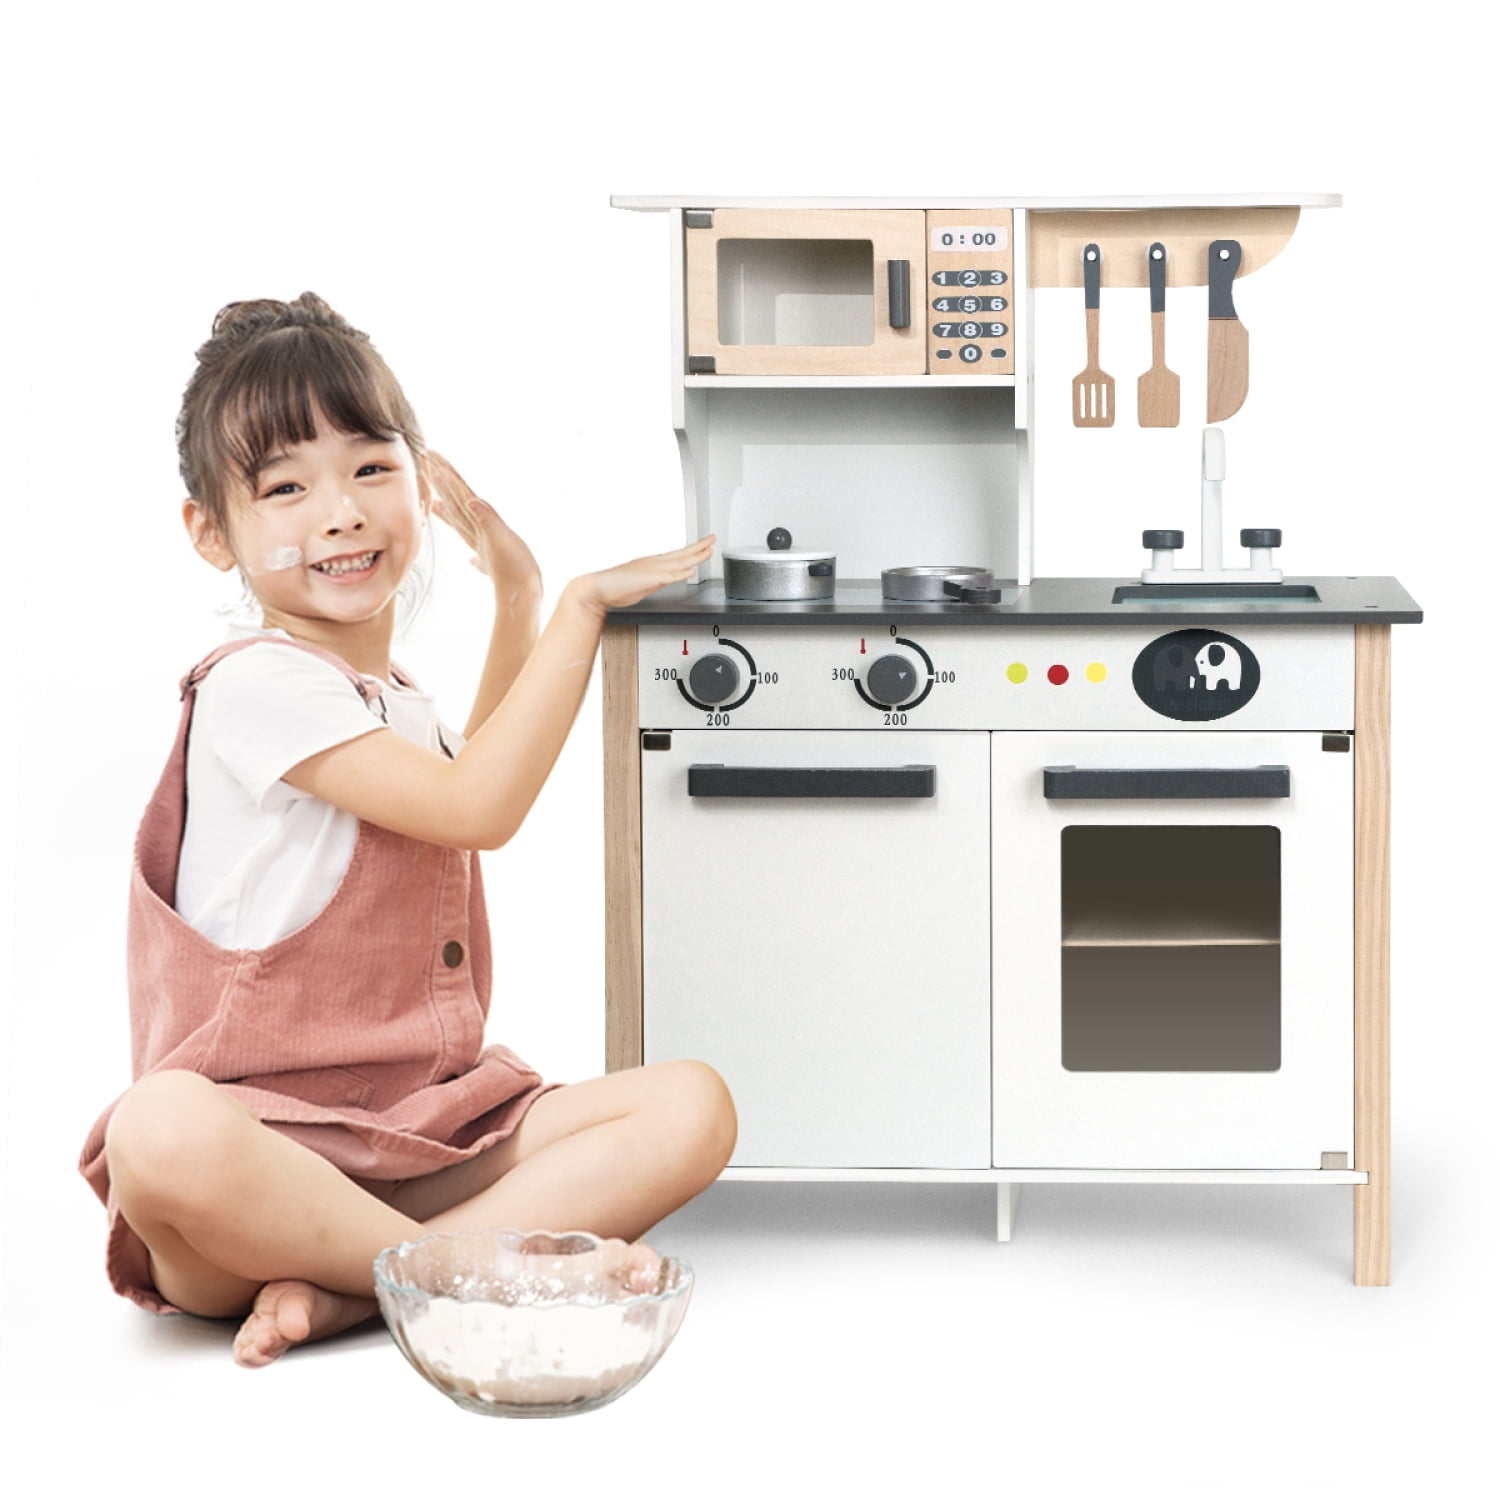 2022 Kitchen Gift Guide – Kids & Adults! – Food Play Go